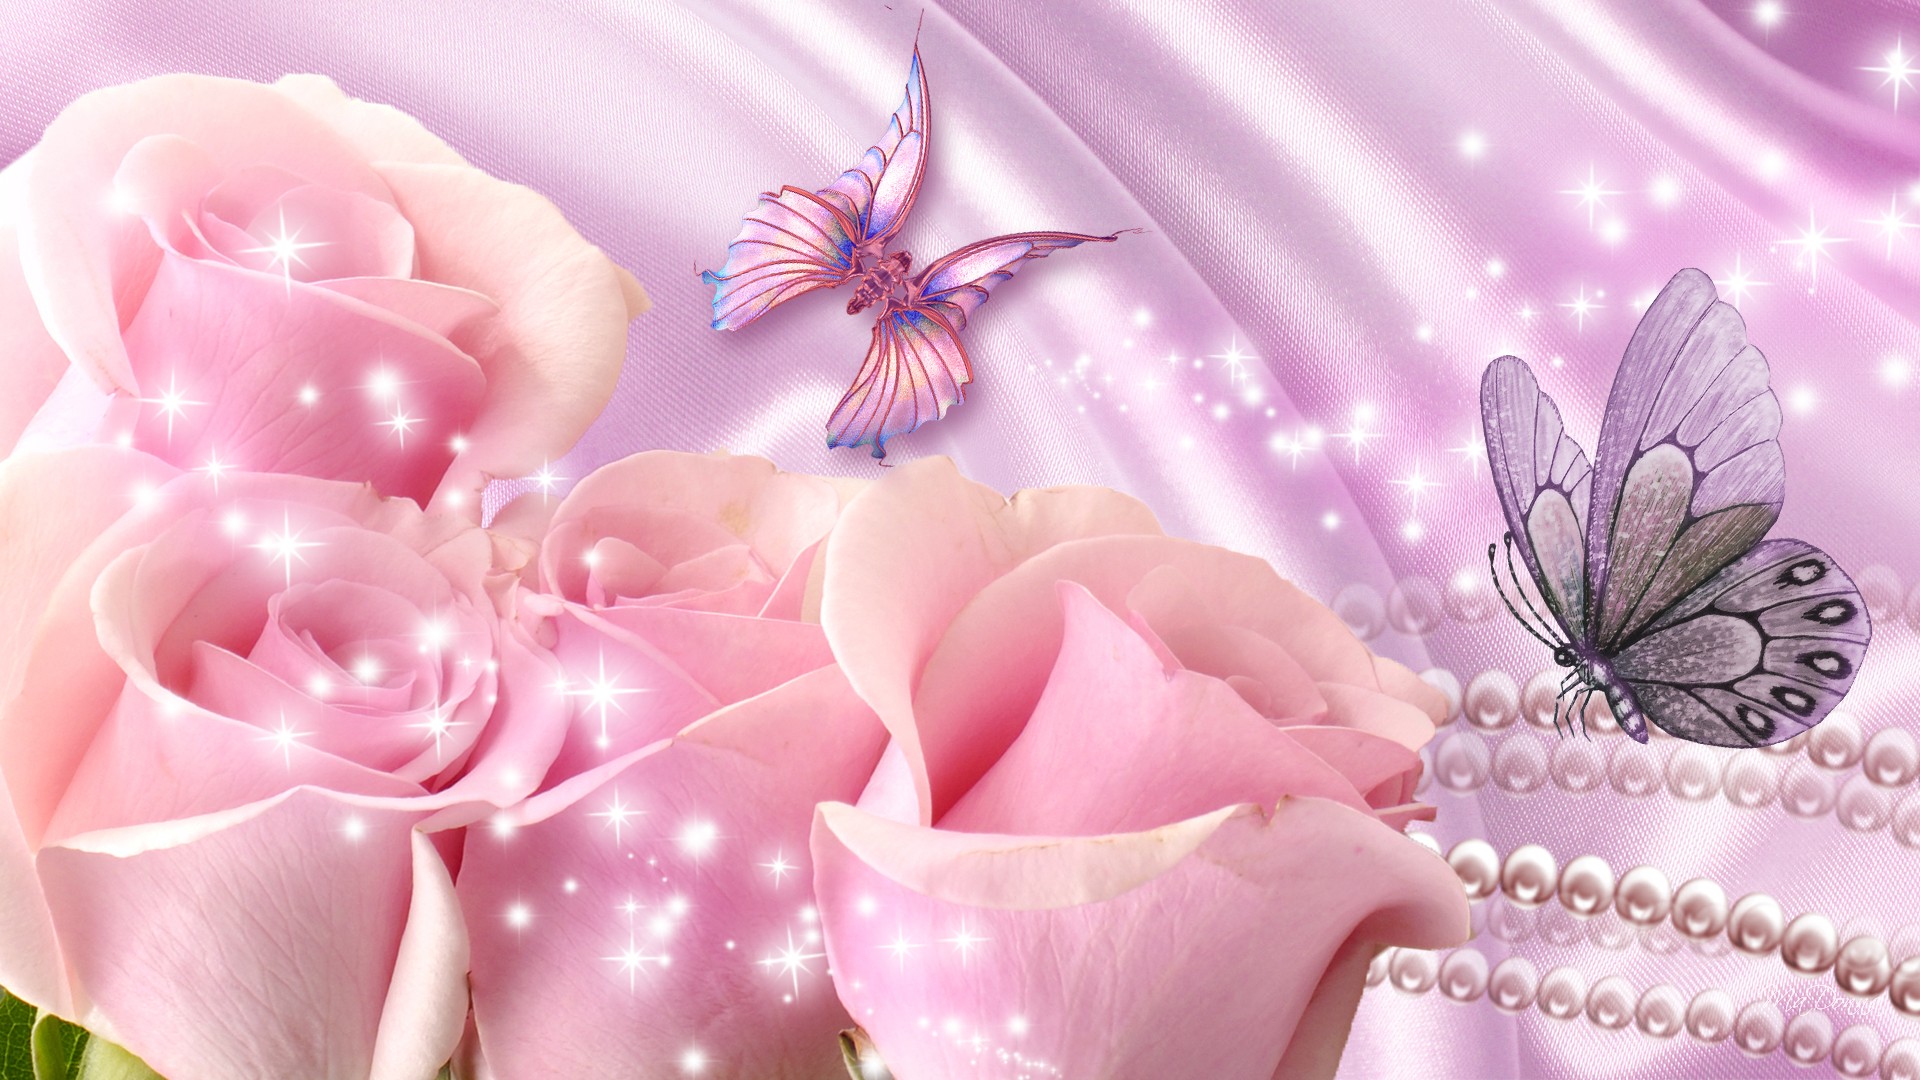 for forums [urlhttpwwwimgioncompink roses with butterflies